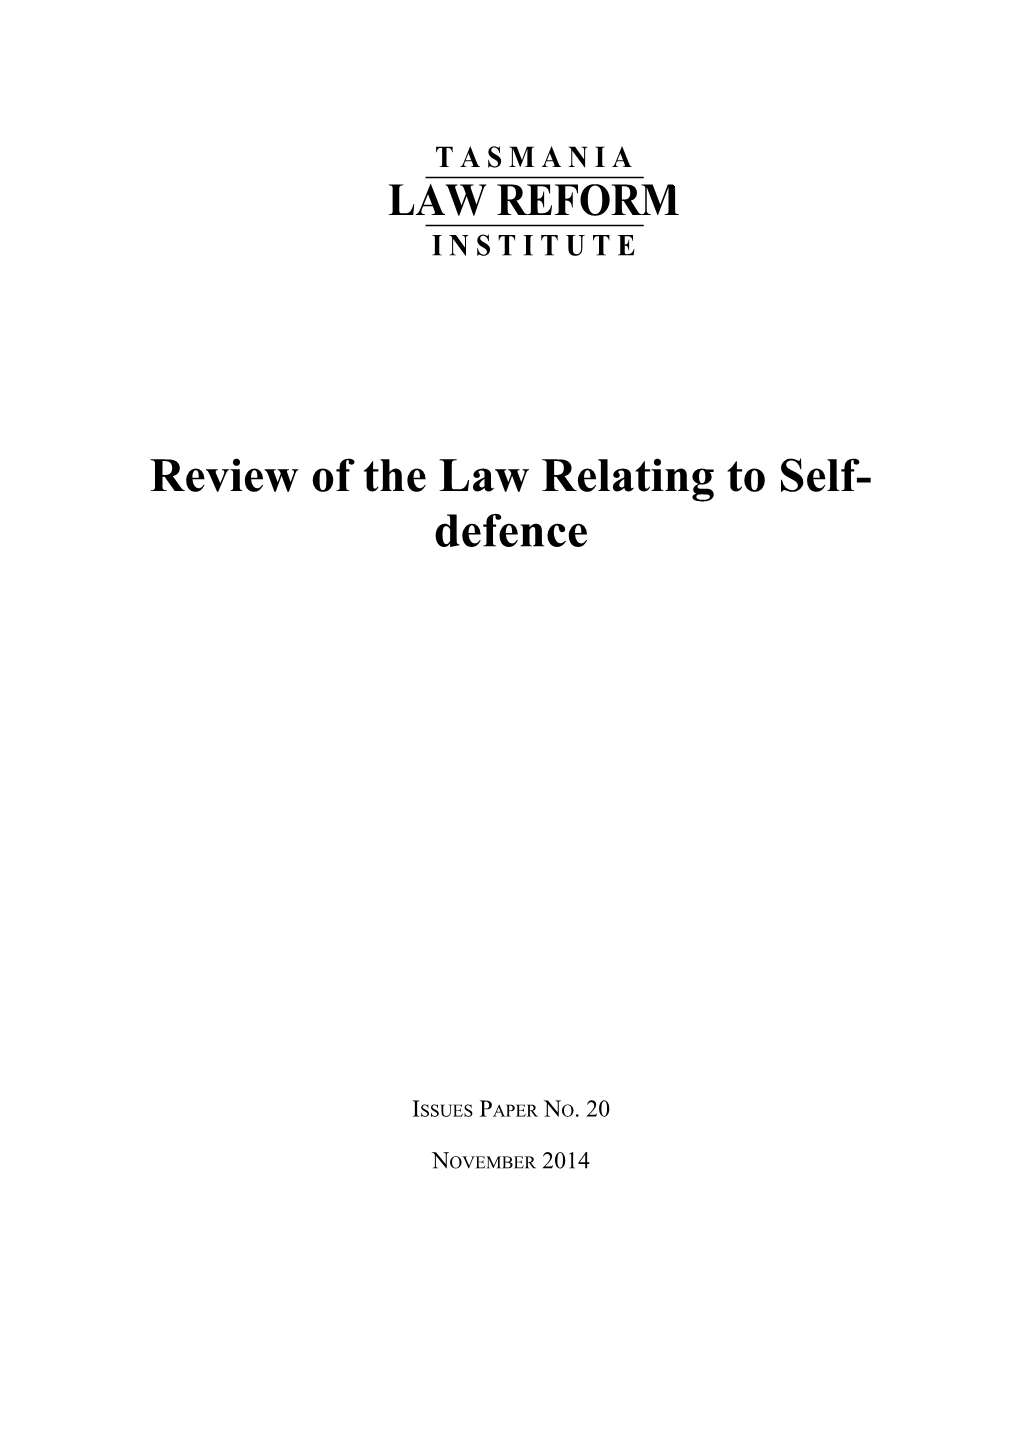 Review of the Law Relating to Self-Defence